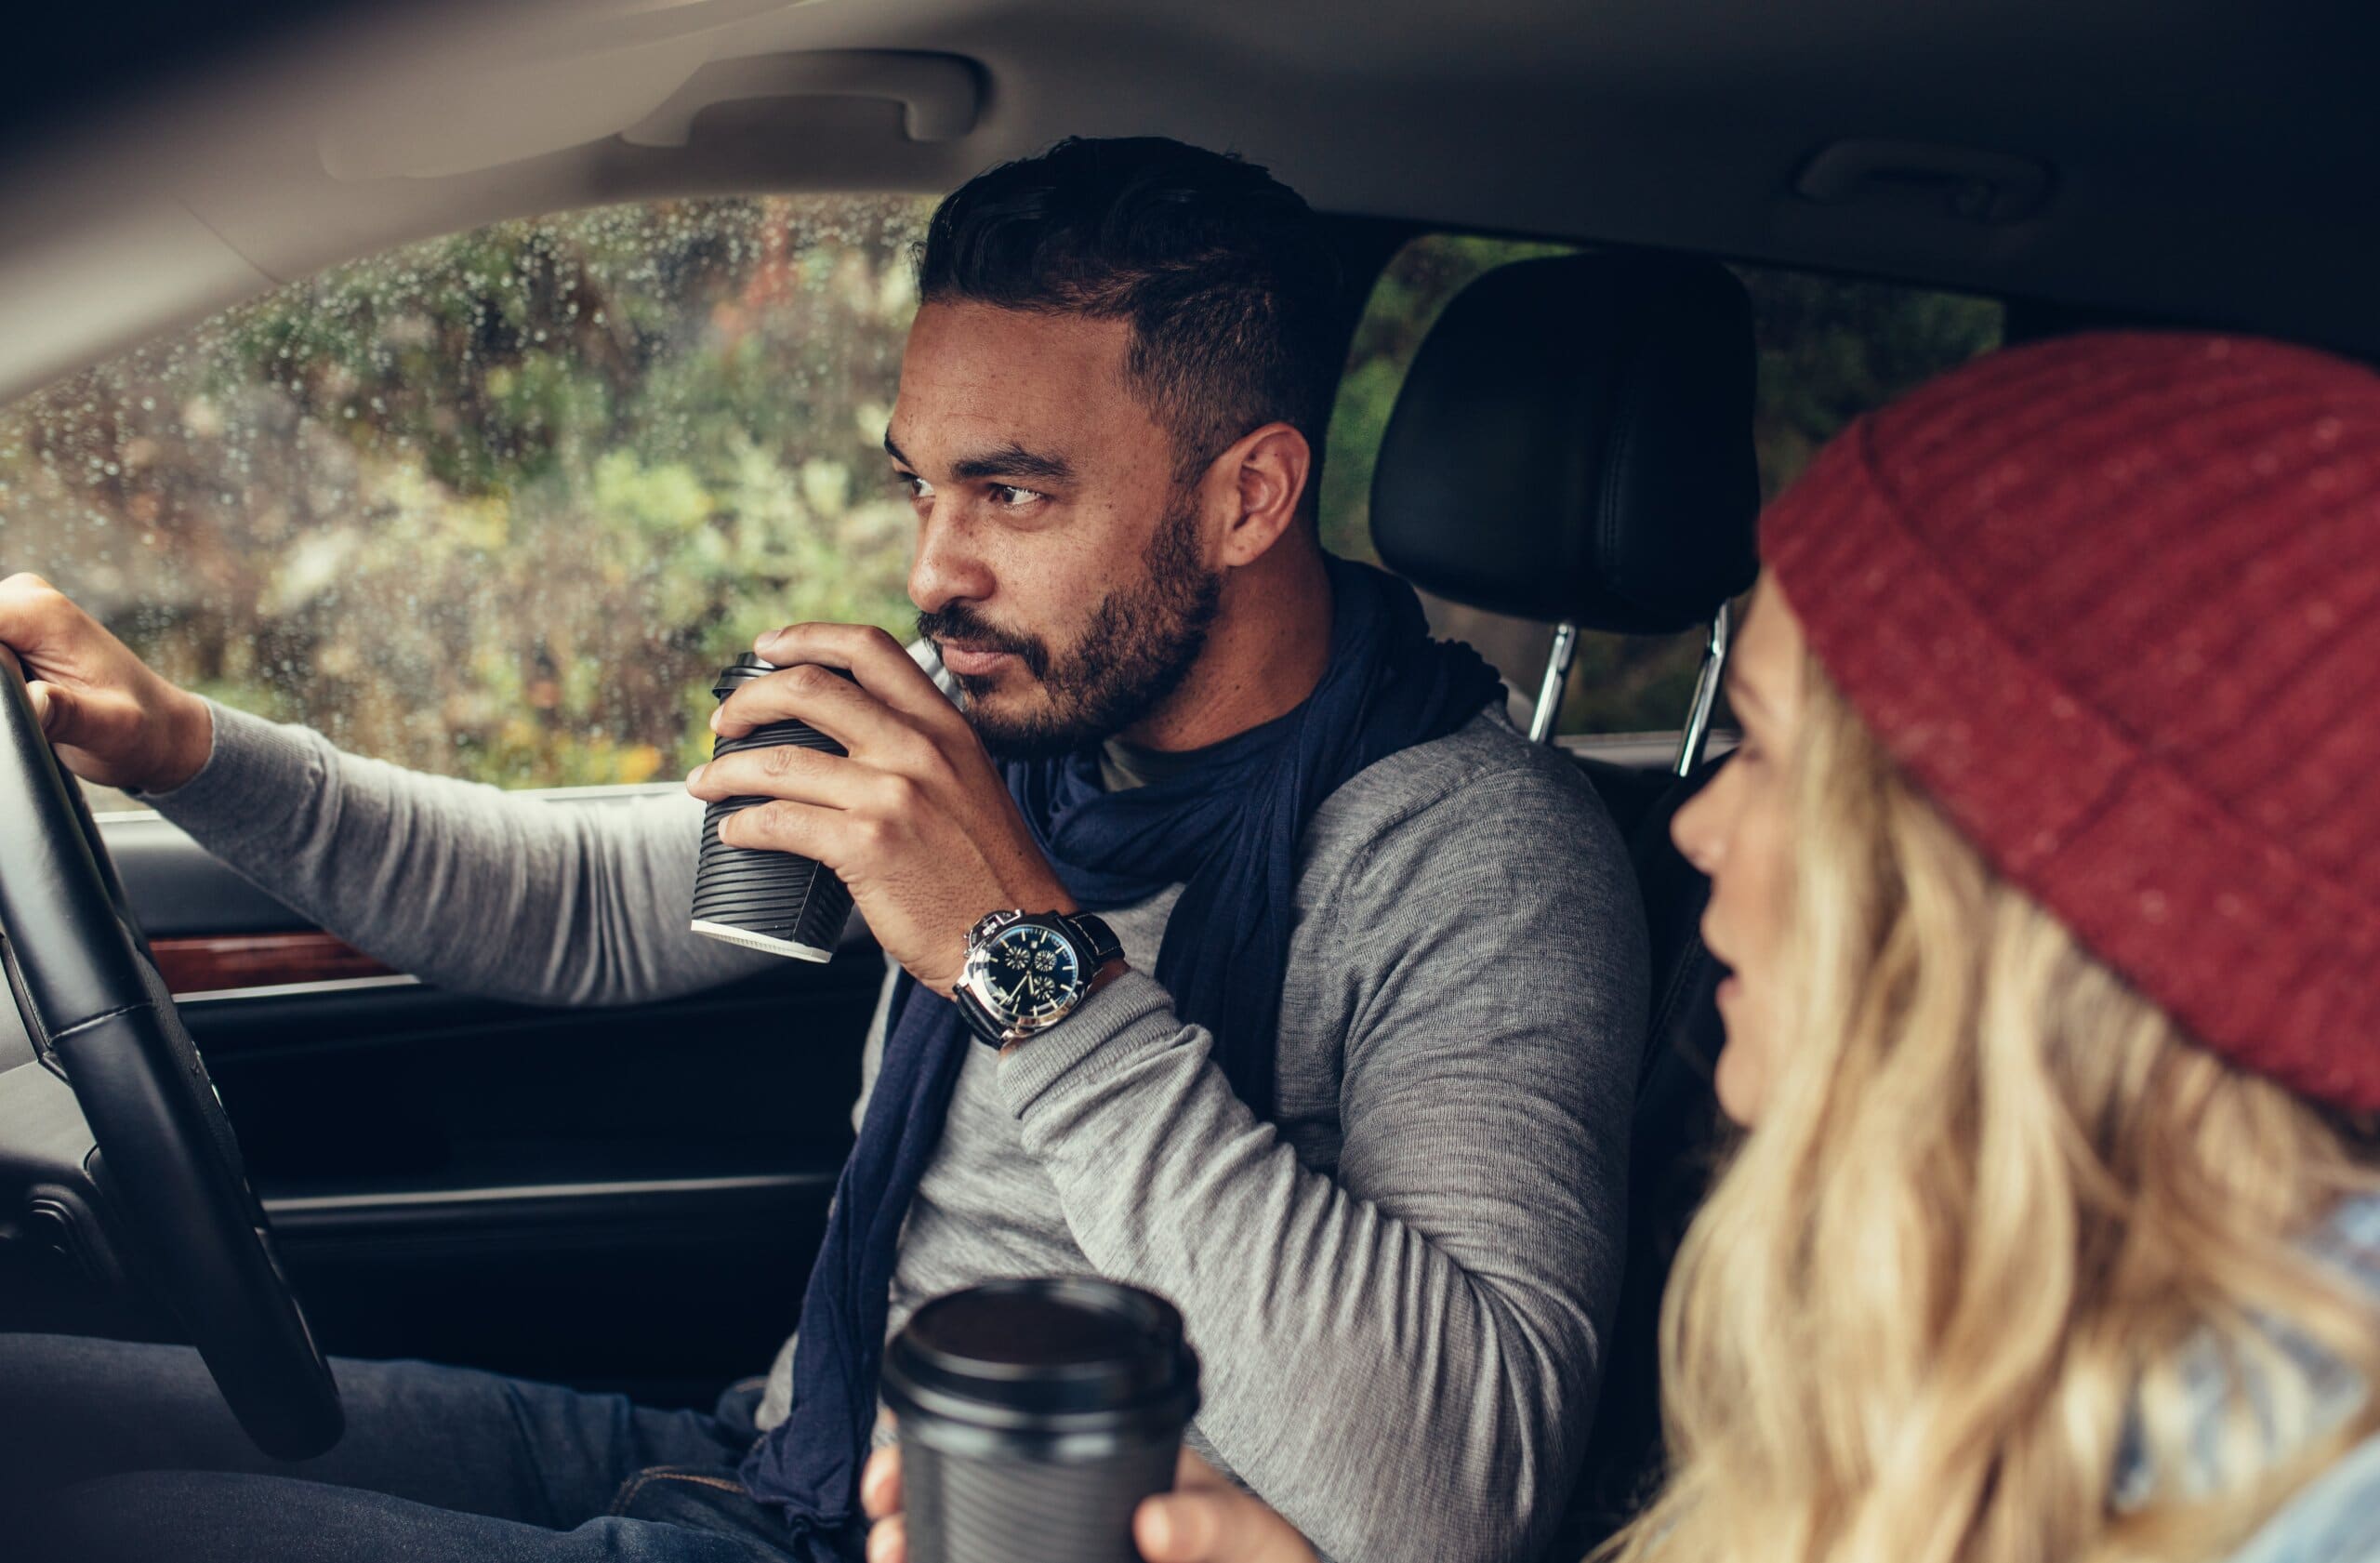 Couple drinking couple coffee in a car on a journey, wearing hats and scarves.